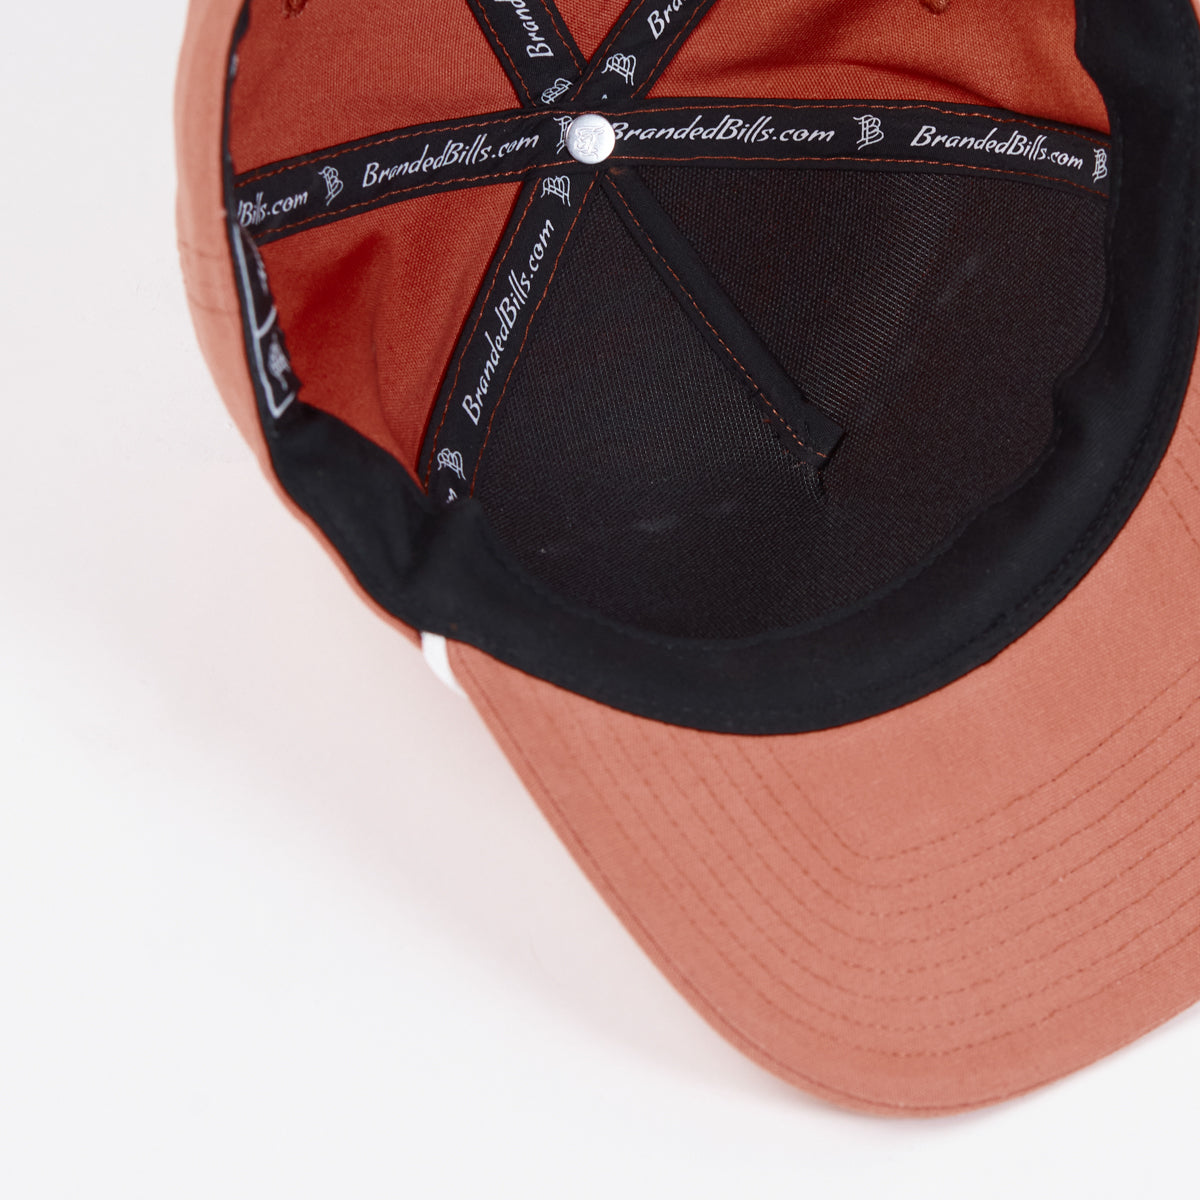 Old Glory Stealth Canvas 5 Panel Rope Peach